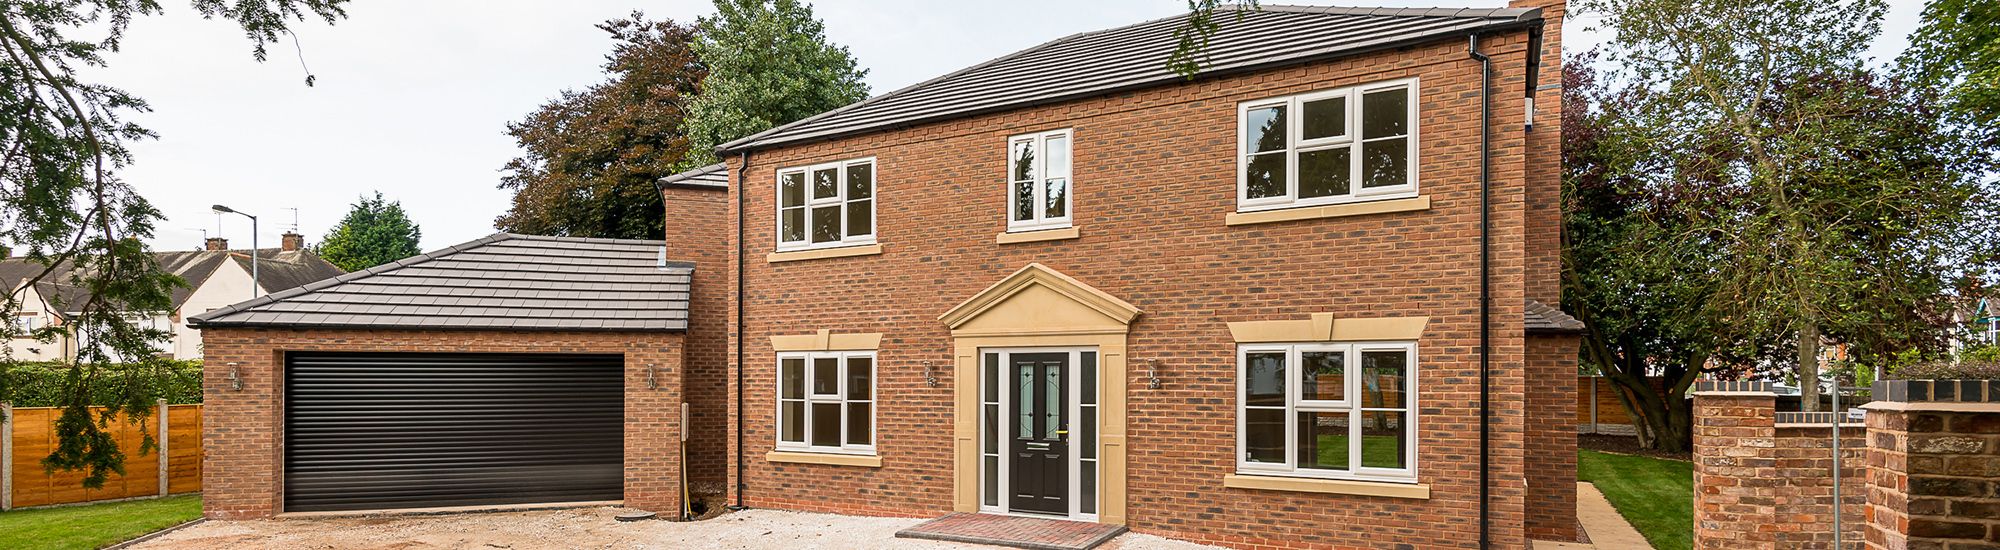 New Builds Staffordshire